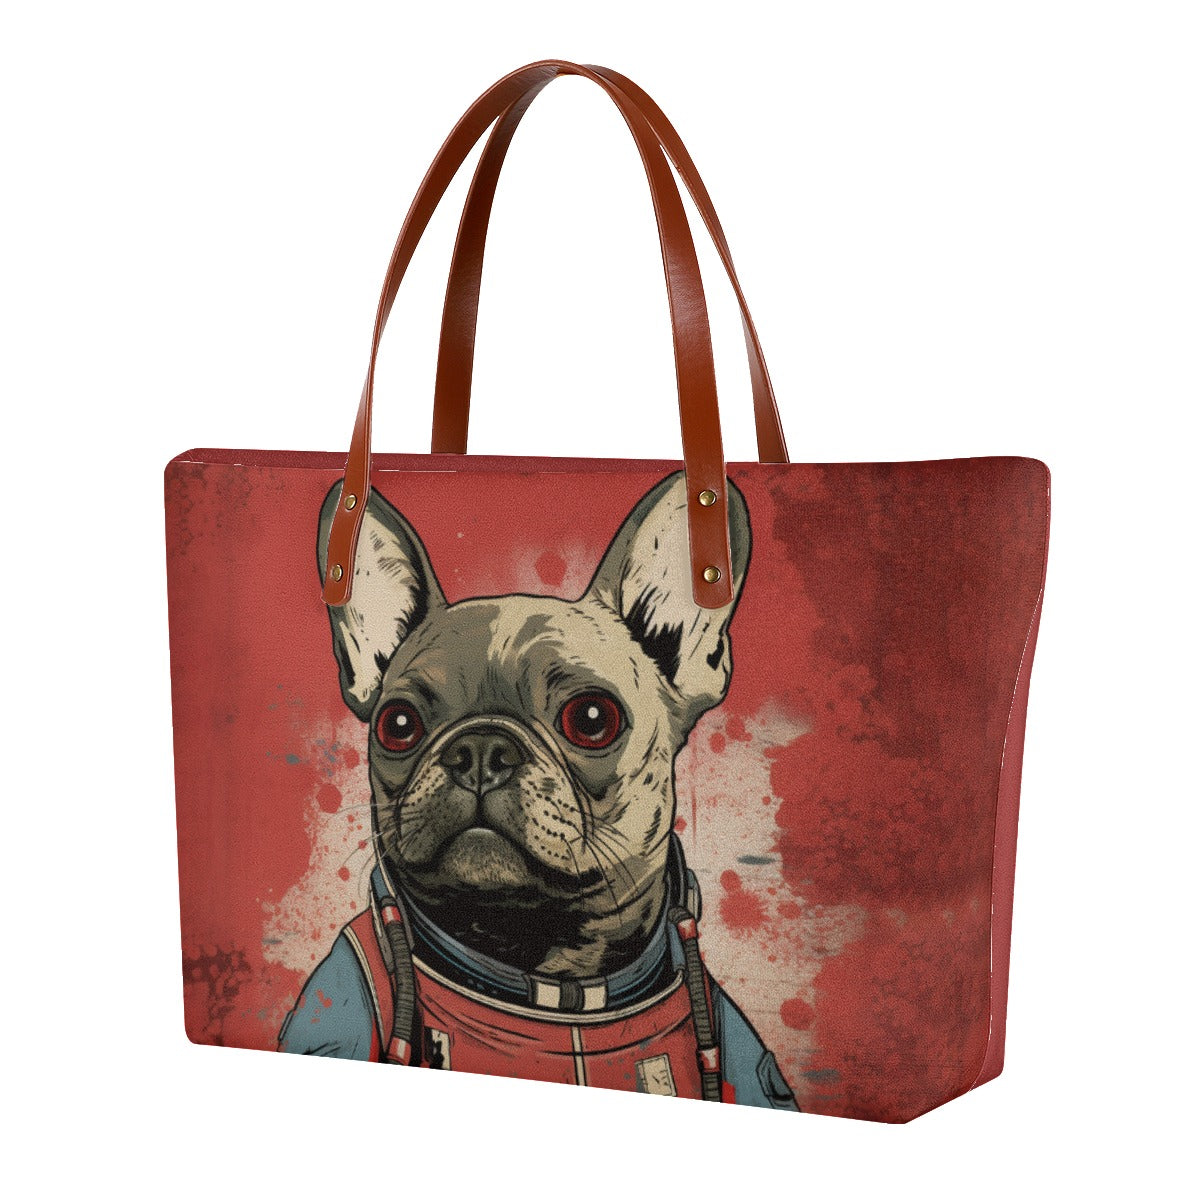 Women's Frenchie Tote Bag - Charming Canine Accessory